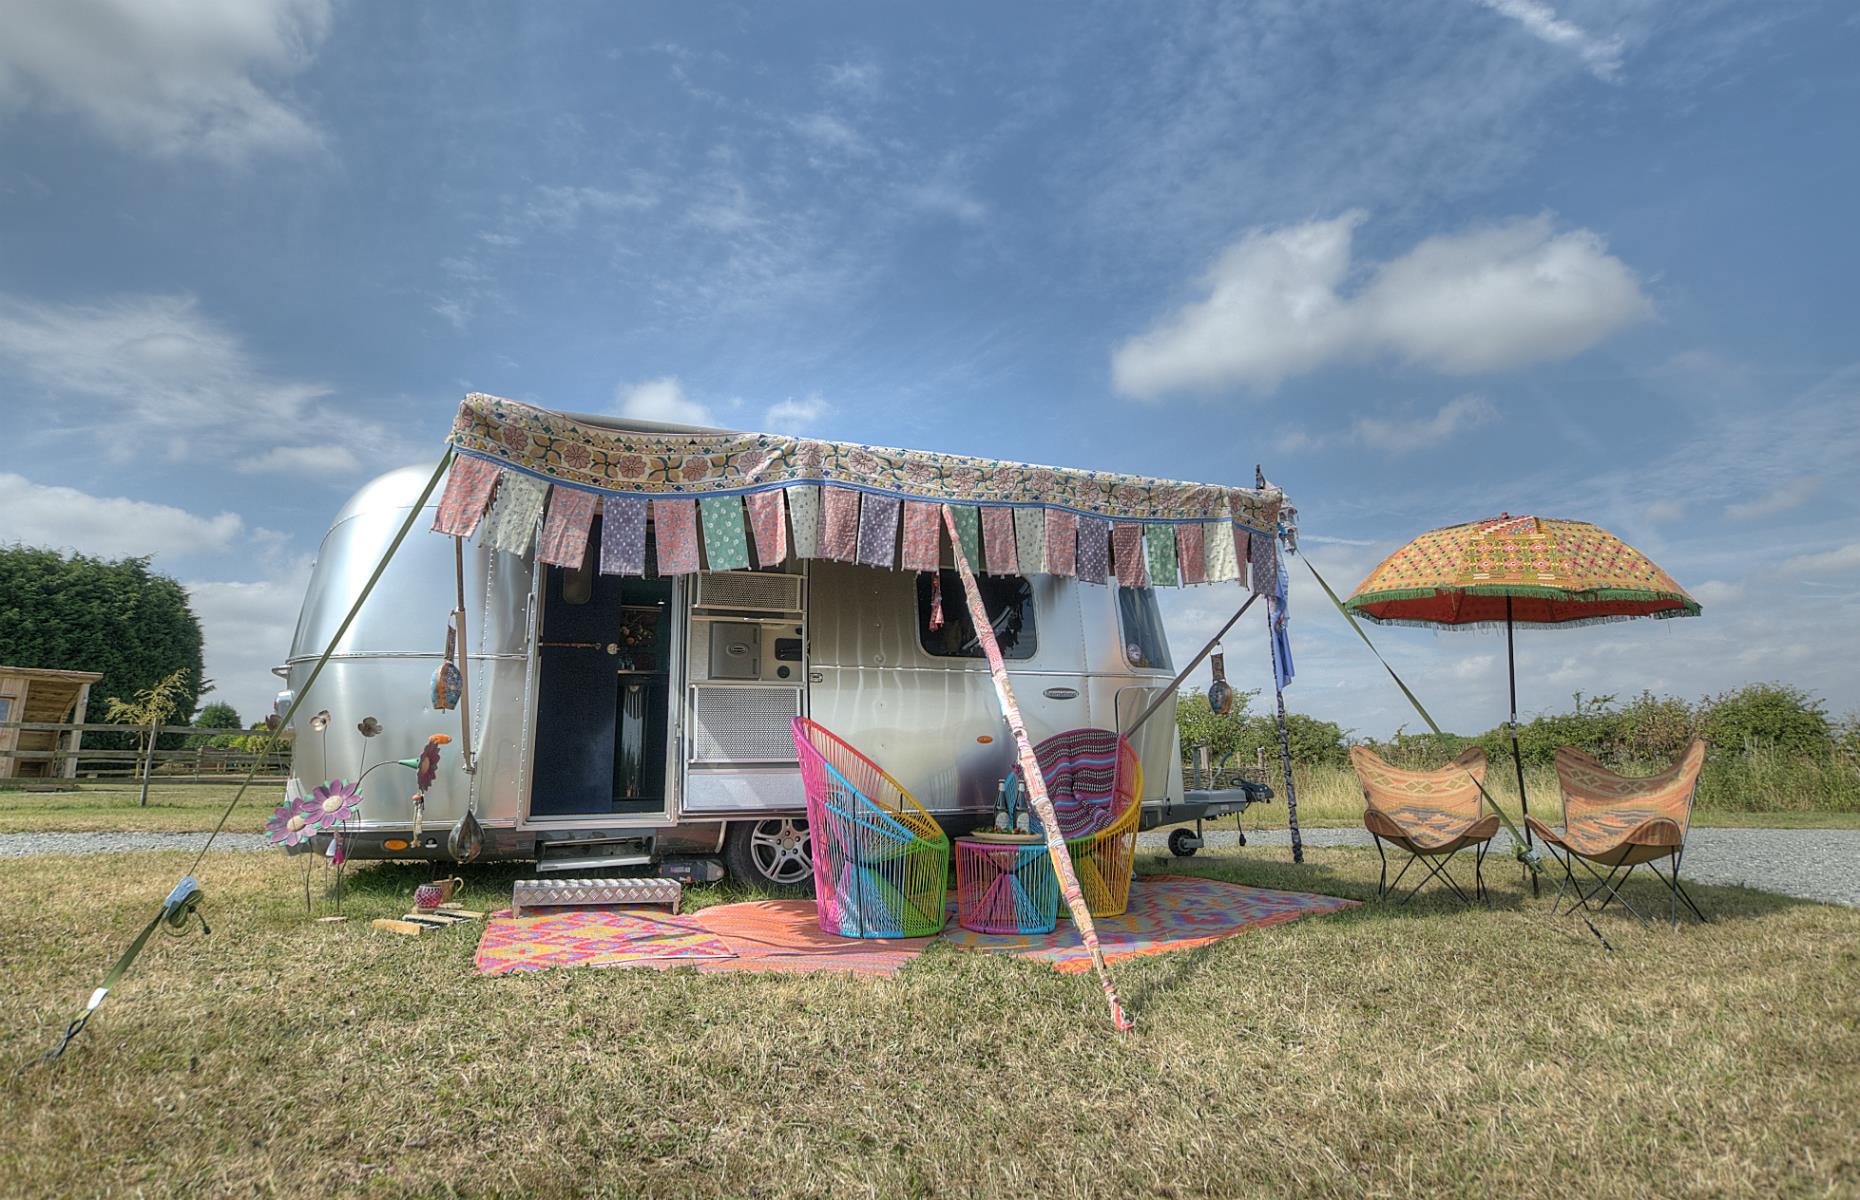 <p>This colorful <a href="https://www.ettiesfield.com/">Airstream</a> has everything you need for a comfortable self-catering getaway, including a deluxe kitchen, en-suite bathroom and a double bed. ‘Ettie’ also benefits from a scenic countryside location, with a herd of alpacas on site to boot. Dogs are welcome too.</p>